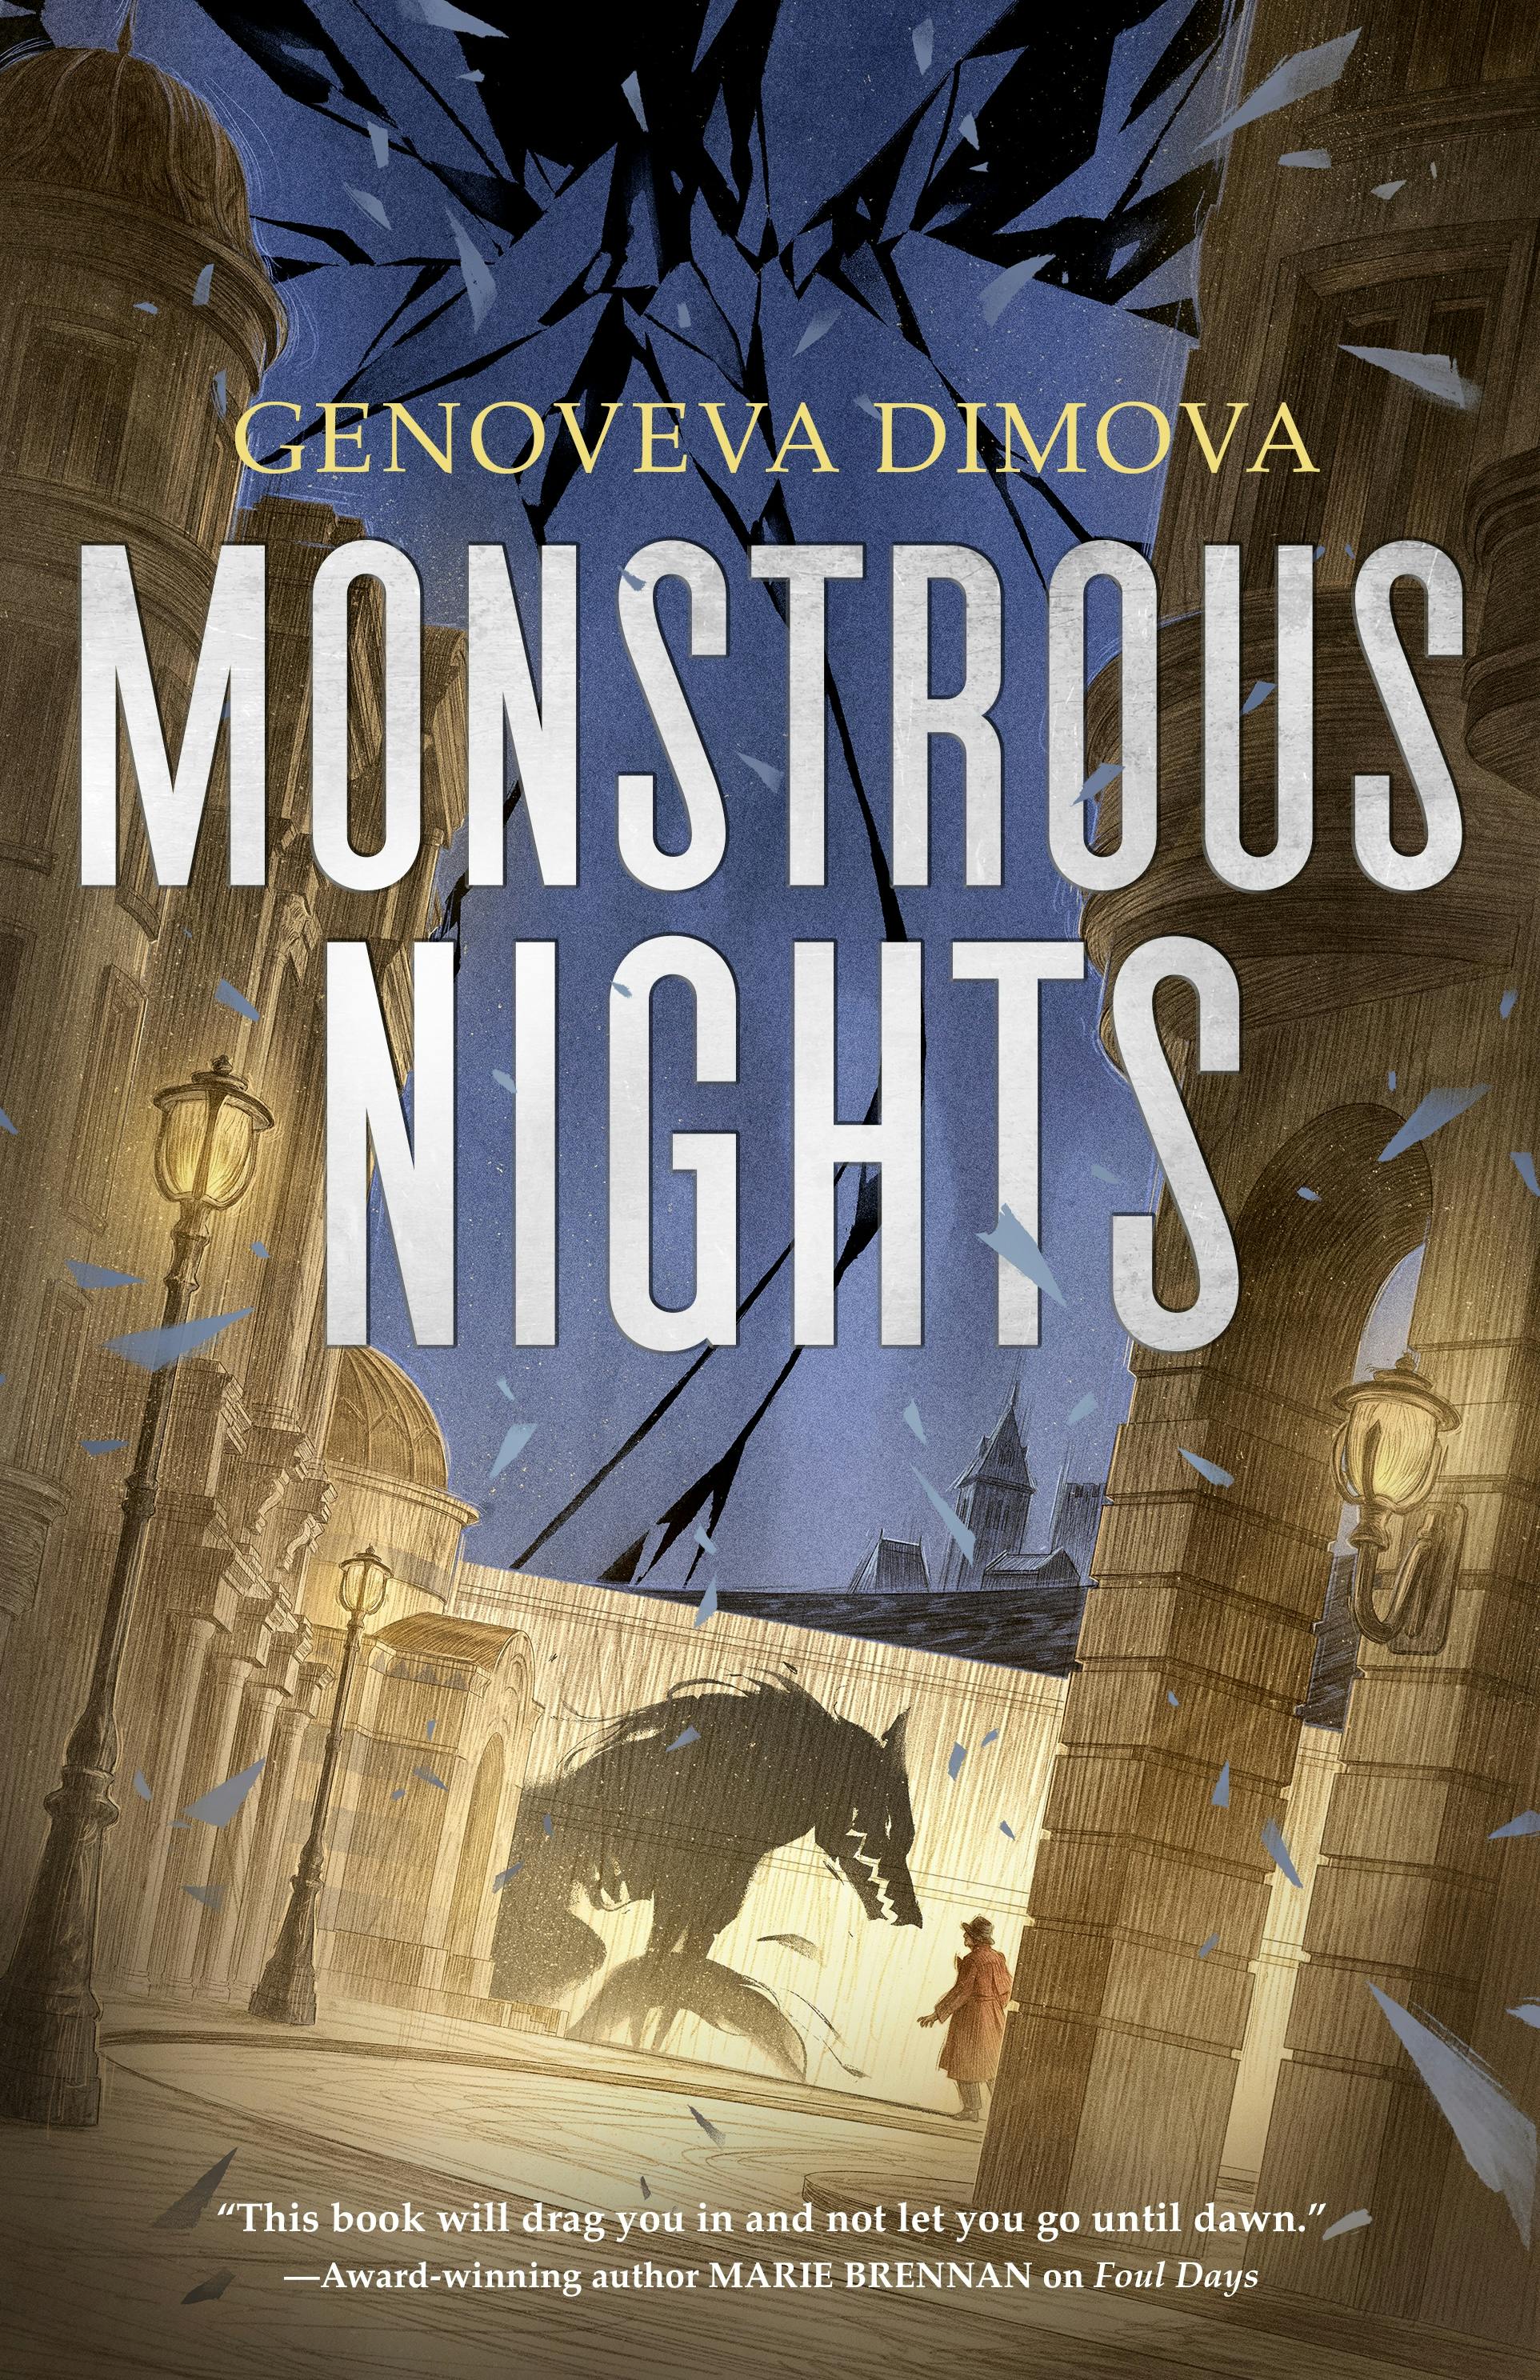 Cover for the book titled as: Monstrous Nights